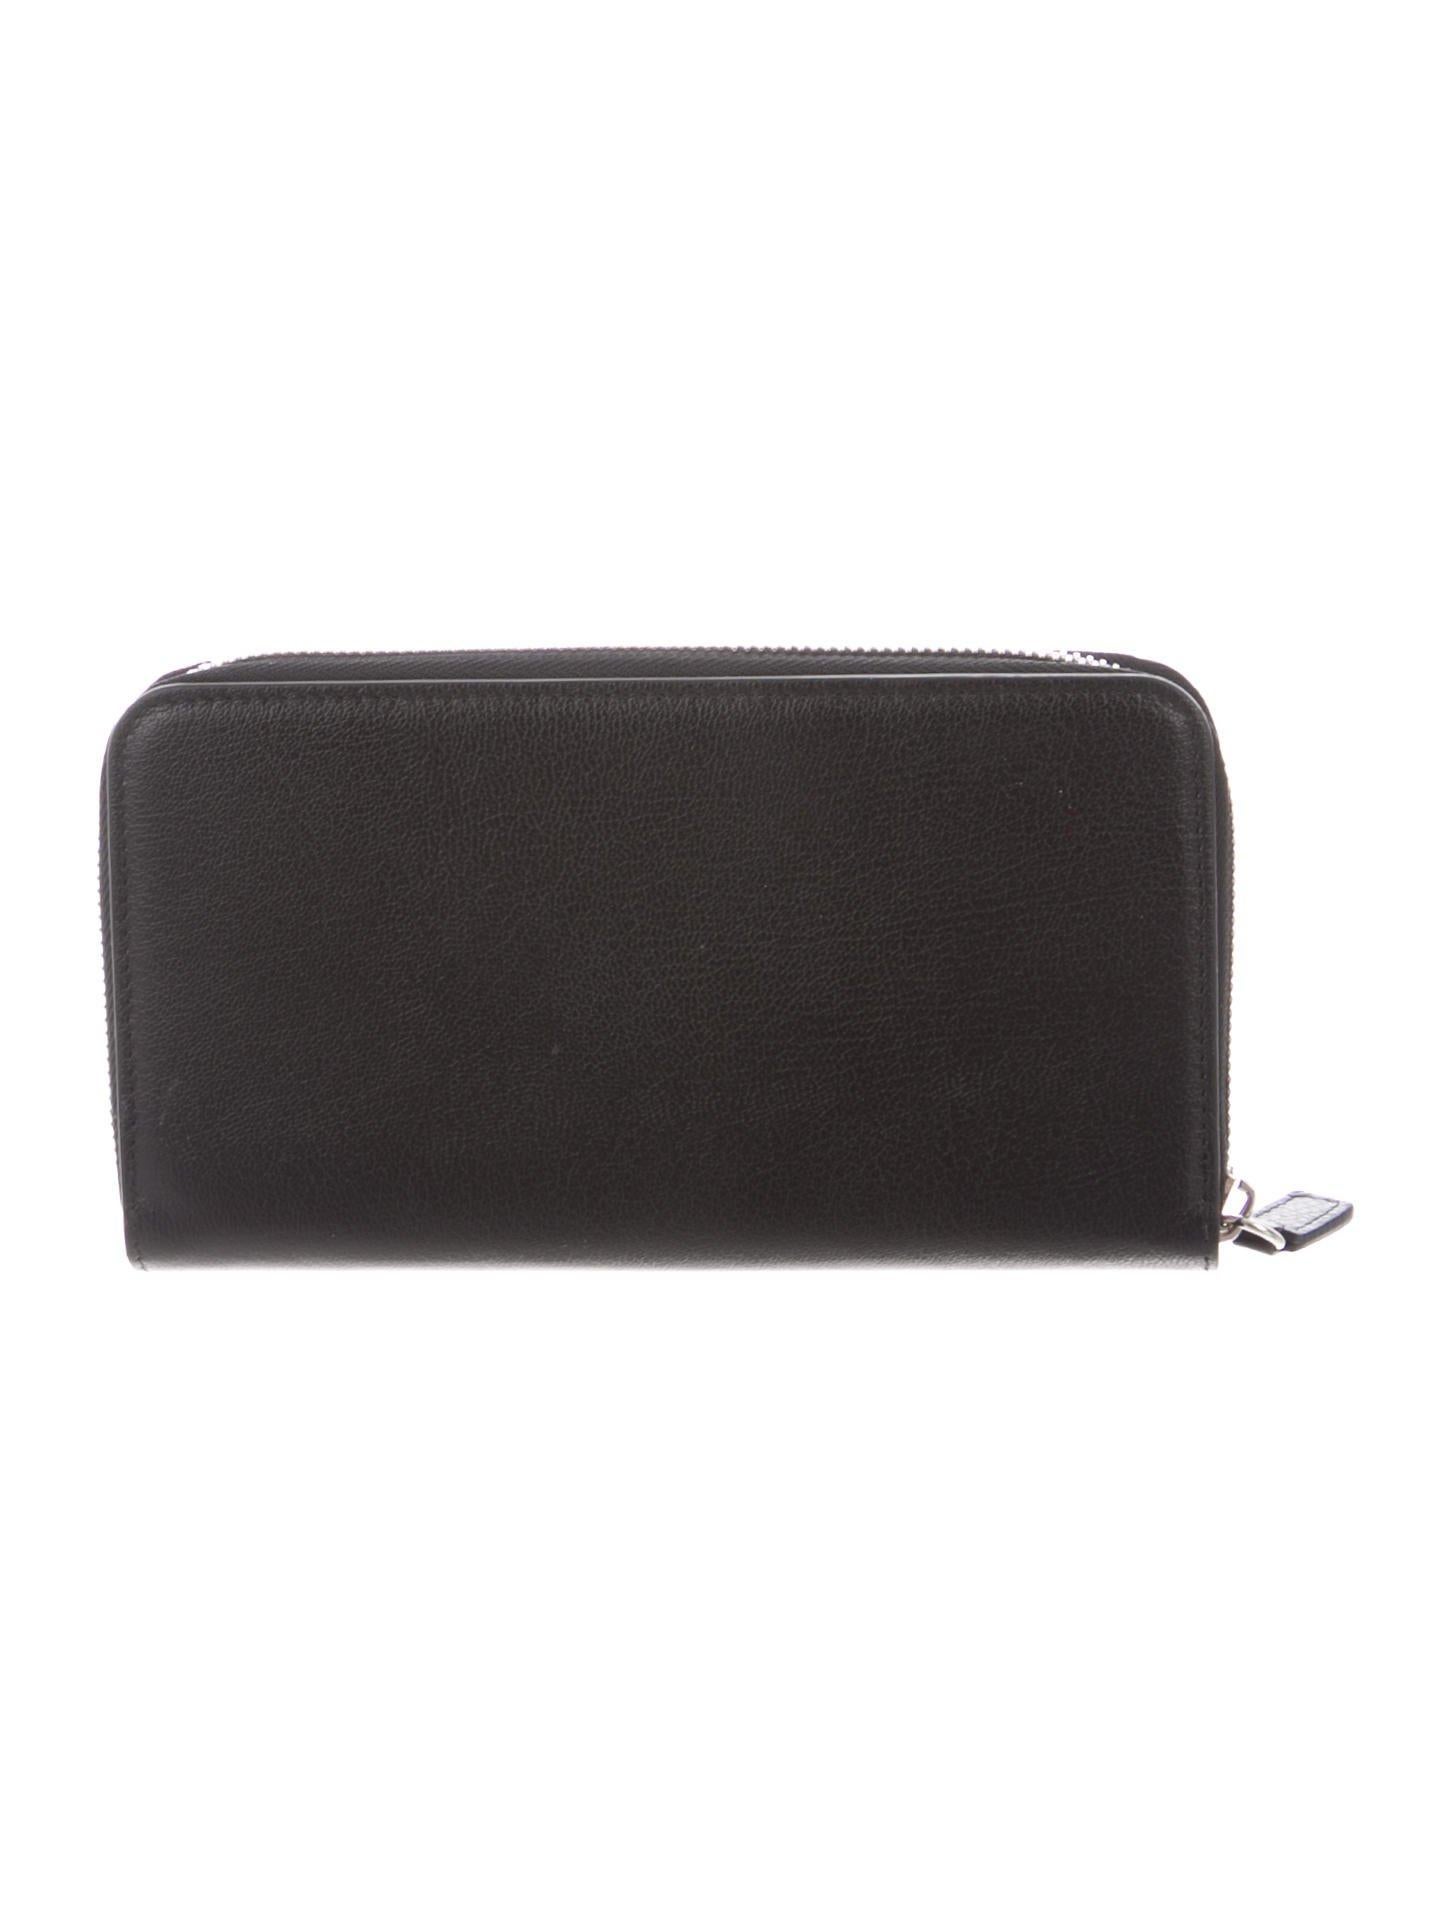 Tom Ford NEW Black Leather Logo Zip Around Clutch Wallet 

Leather 
Silver tone hardware
Leather lining
Made in Italy
Features cash slots, zipper pocket, twelve card slots 
Measures 7.5